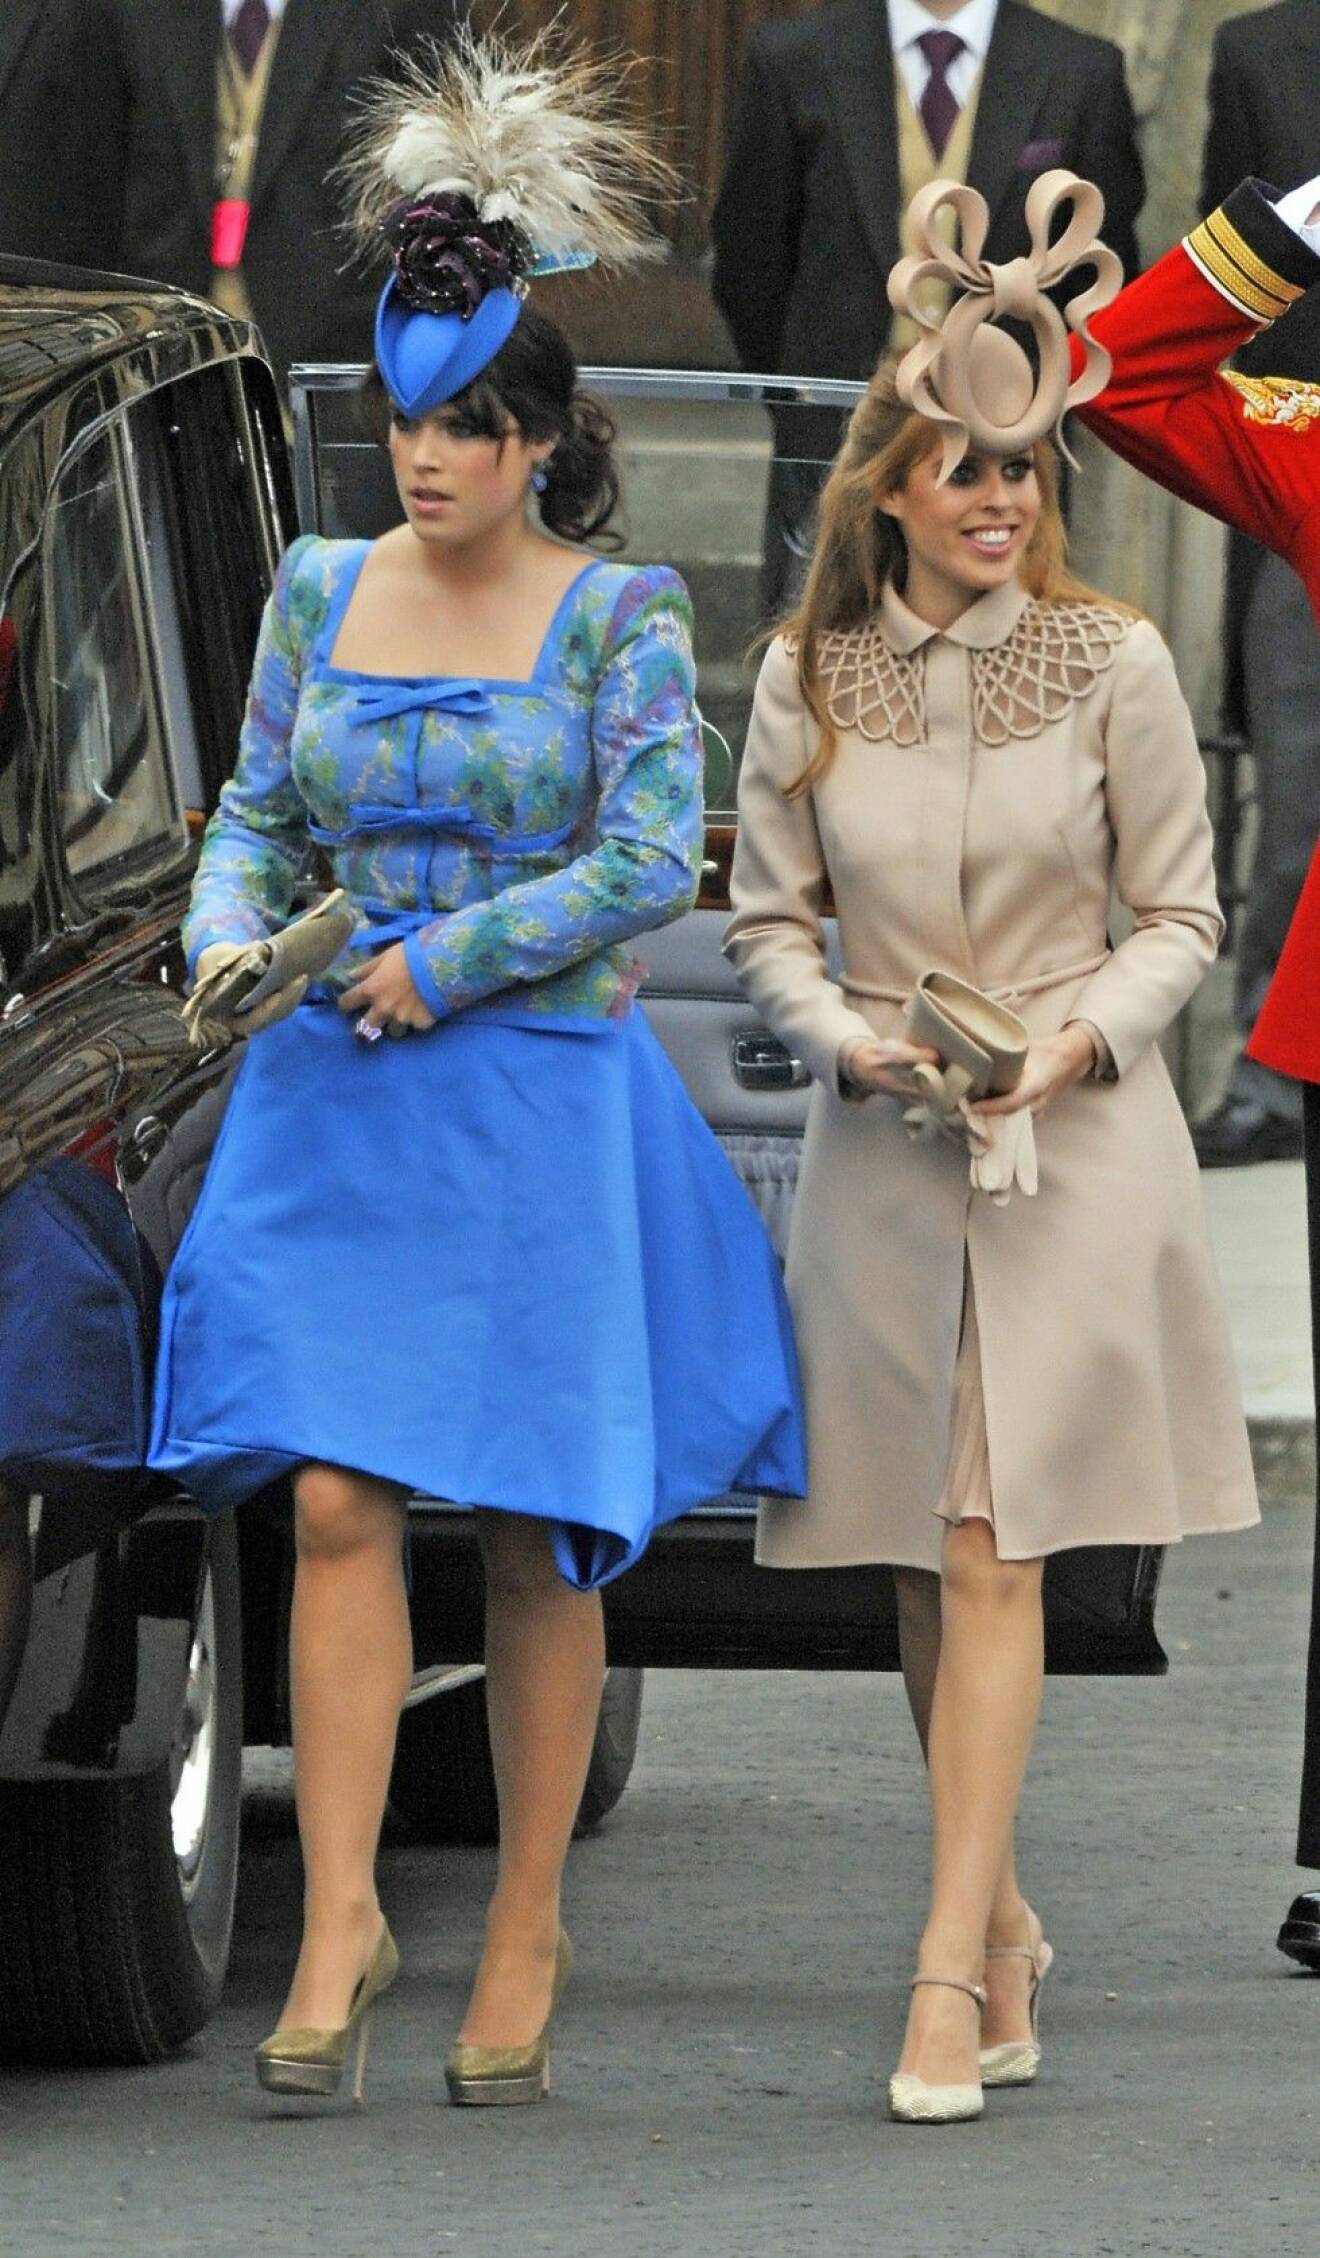 Marriage Of Hrh Prince William To Catherine Middleton At Westminster Abbey London. Pic Shows: Princess Beatrice And Princess Eugenie The Royal Wedding Of Prince William Of Wales To Catherine Middleton (kate Middleton) On 29th April 2011. Now Duke And